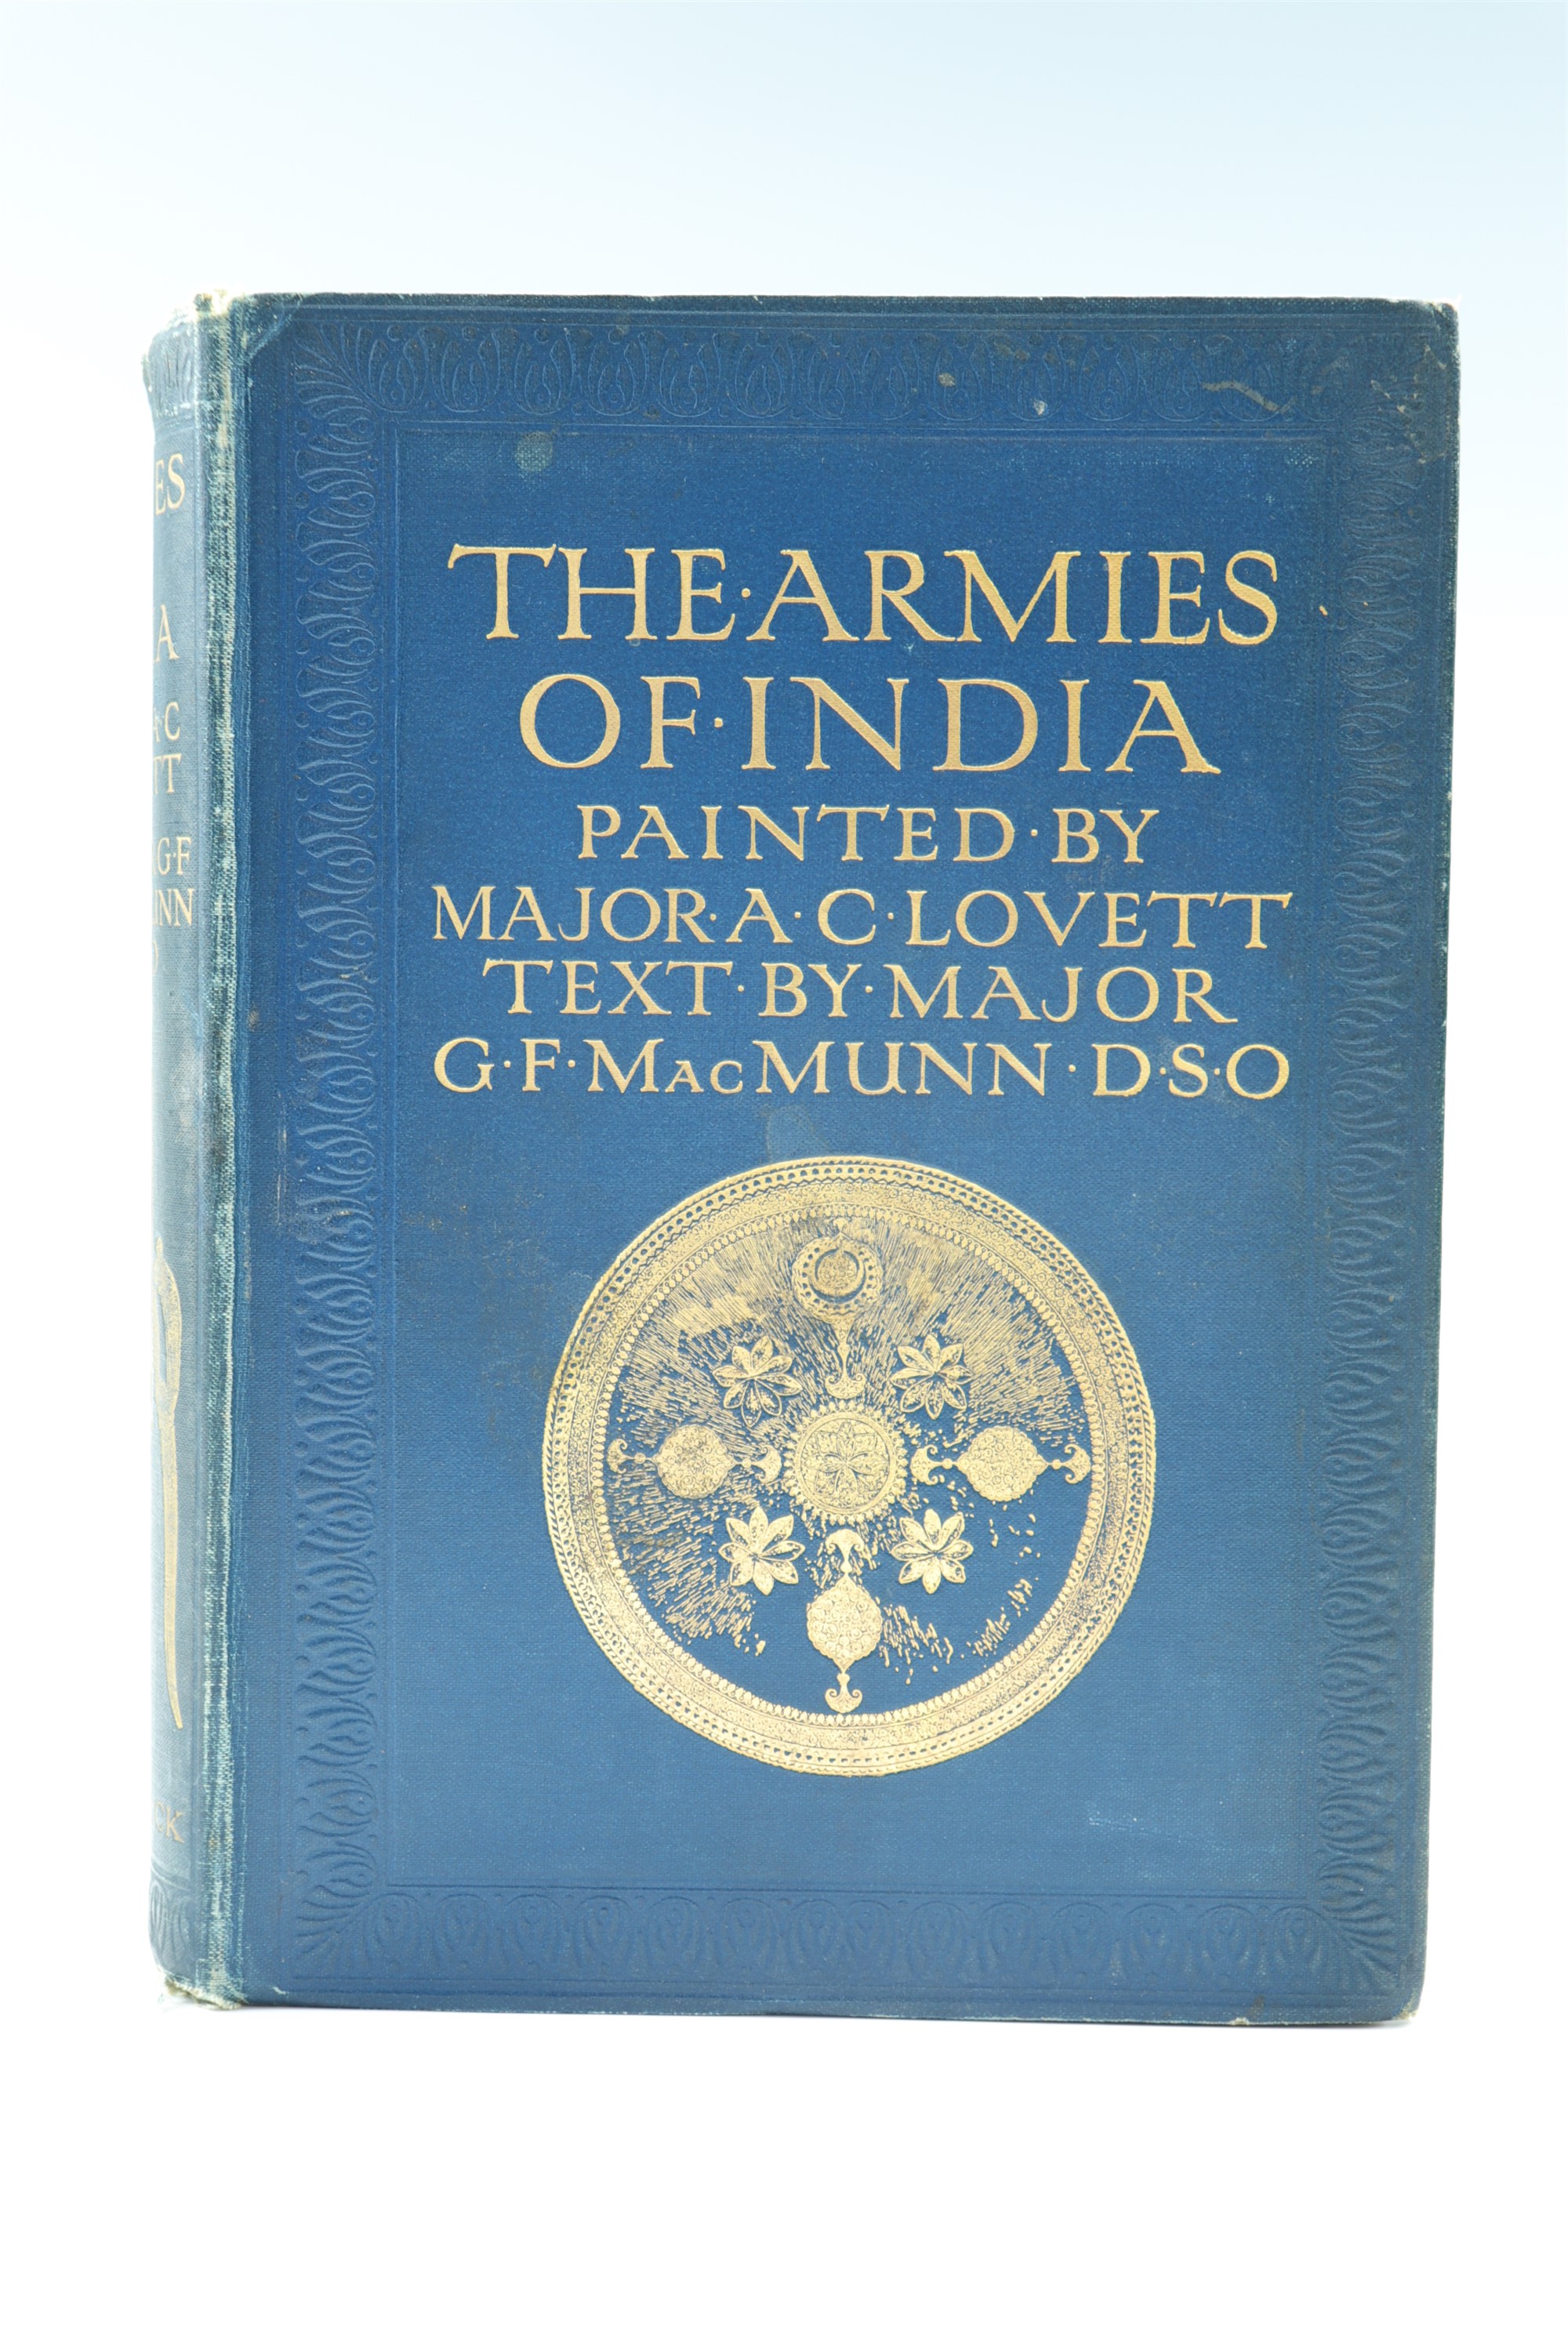 G F MacMunn DSO, "The Armies of India", painted by major A C Lovett, A & C Black, 1911